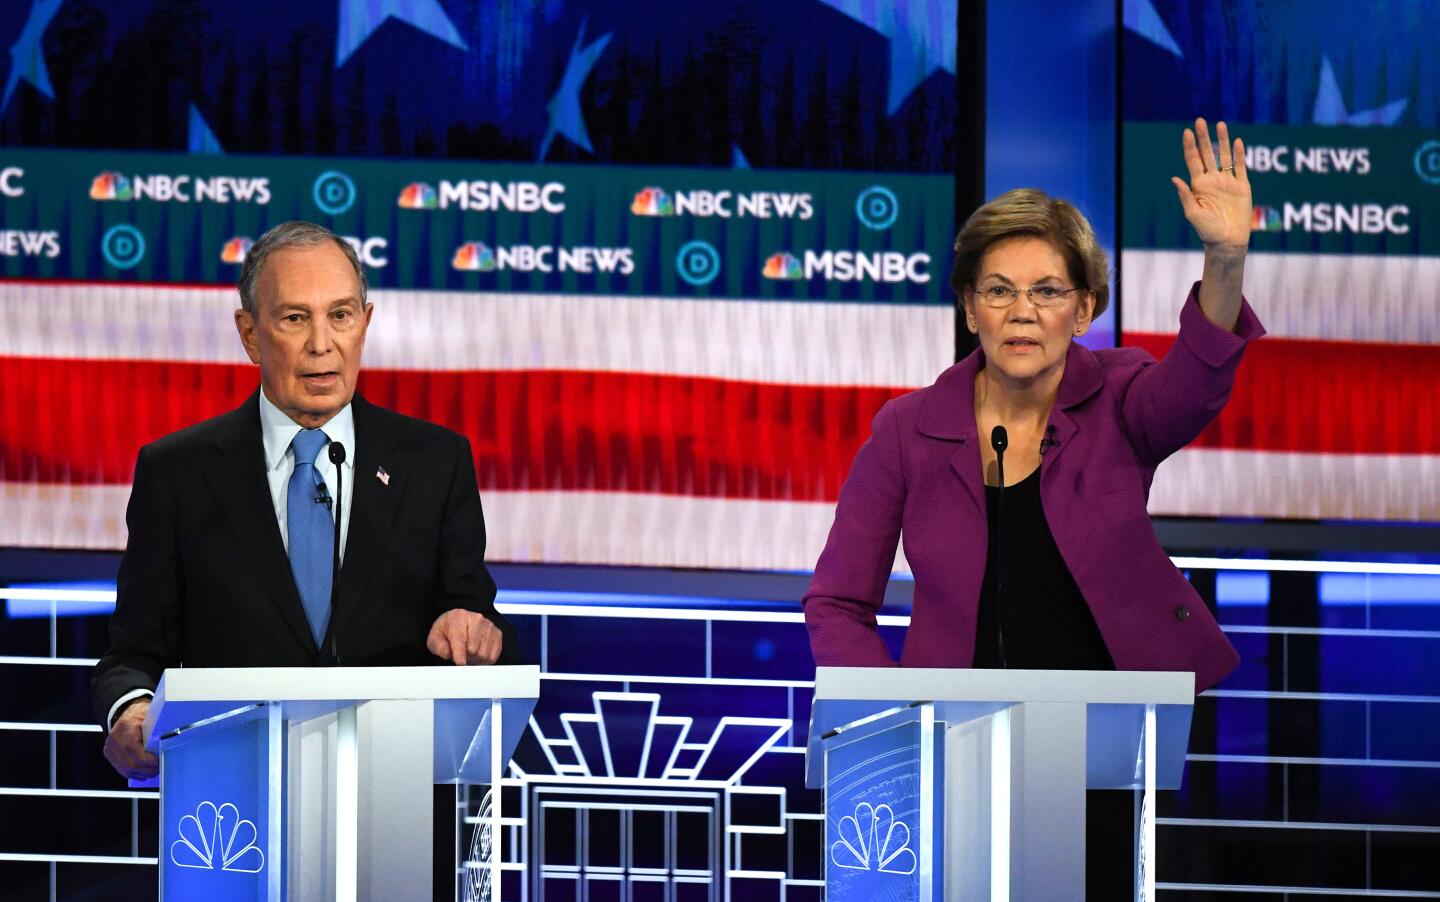 Democratic presidential hopefuls Former New York Mayor Mike Bloomberg and Massachusetts Senator Elizabeth Warren participate in the ninth Democratic primary debate of the 2020 presidential campaign season co-hosted by NBC News, MSNBC, Noticias Telemundo and The Nevada Independent at the Paris Theater in Las Vegas, Nevada, on February 19, 2020. (Photo by Mark RALSTON / AFP) (Photo by MARK RALSTON/AFP via Getty Images)